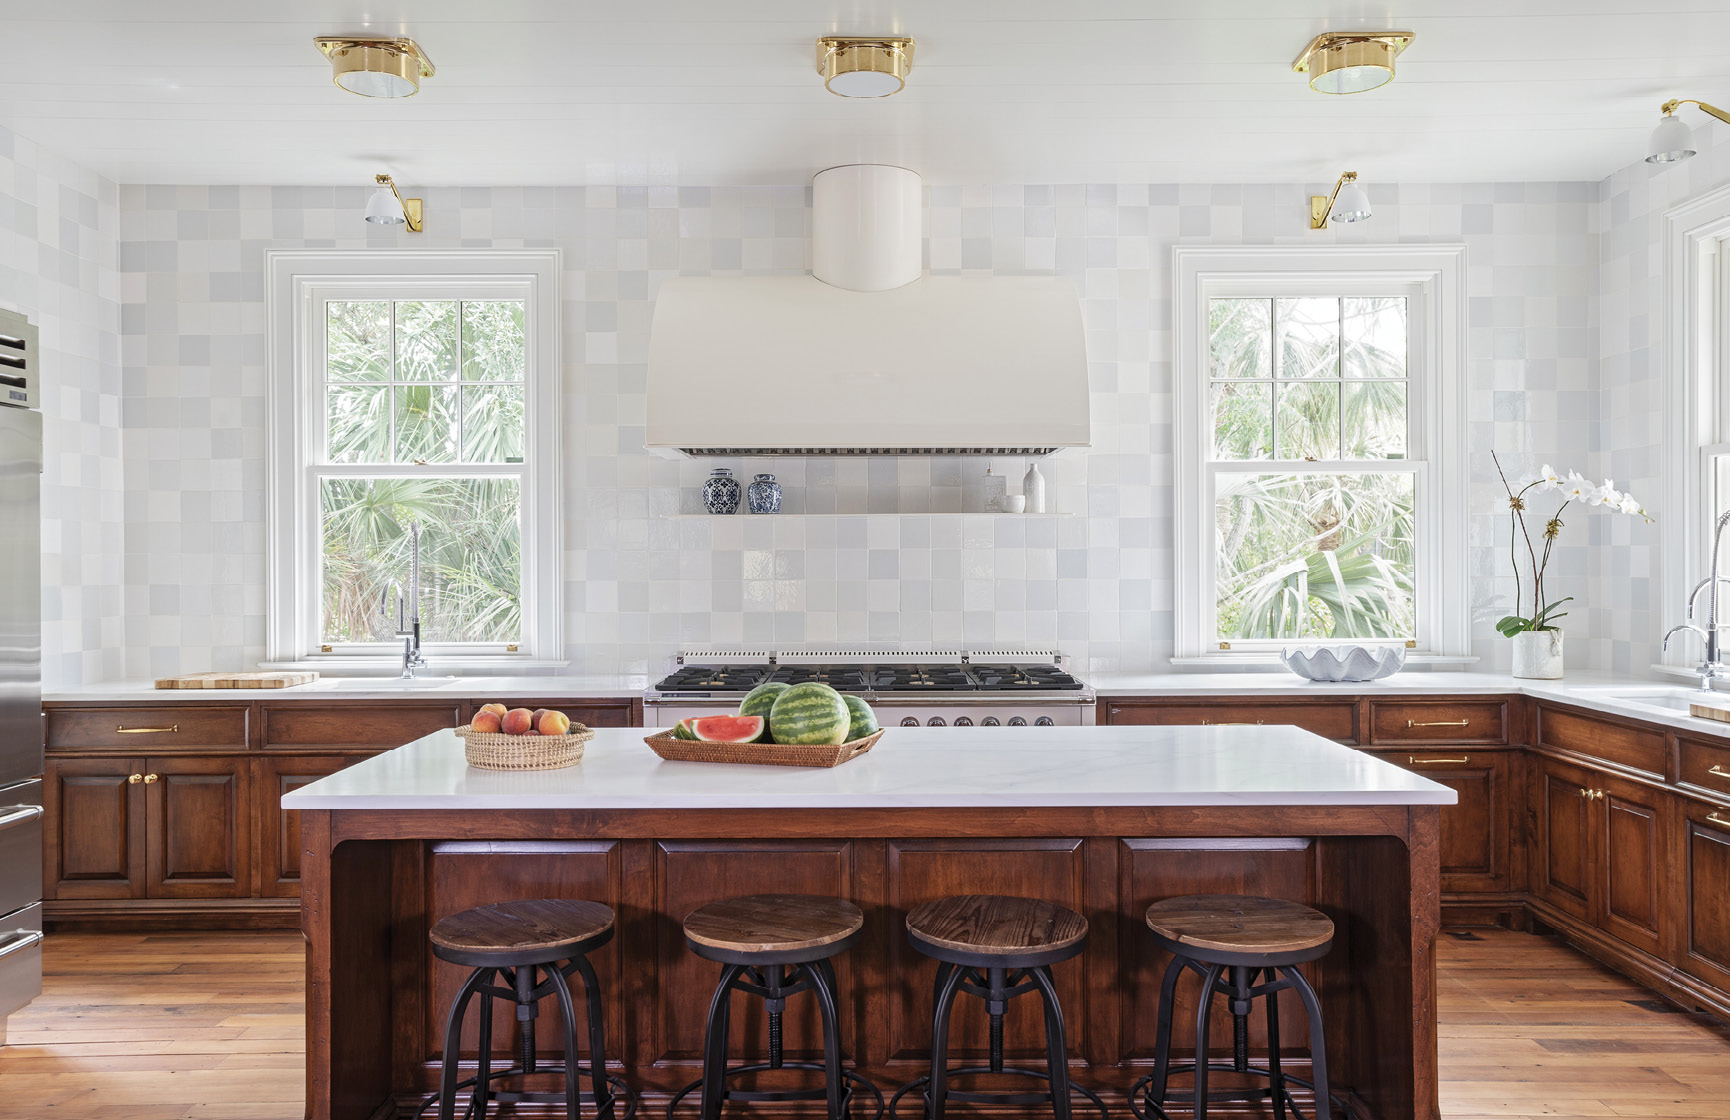 Brass ceiling lights and wall sconces from Urban Electric in the kitchen continue the nautical motif, while the Delft tile in an off-white mix adds depth and dimension.